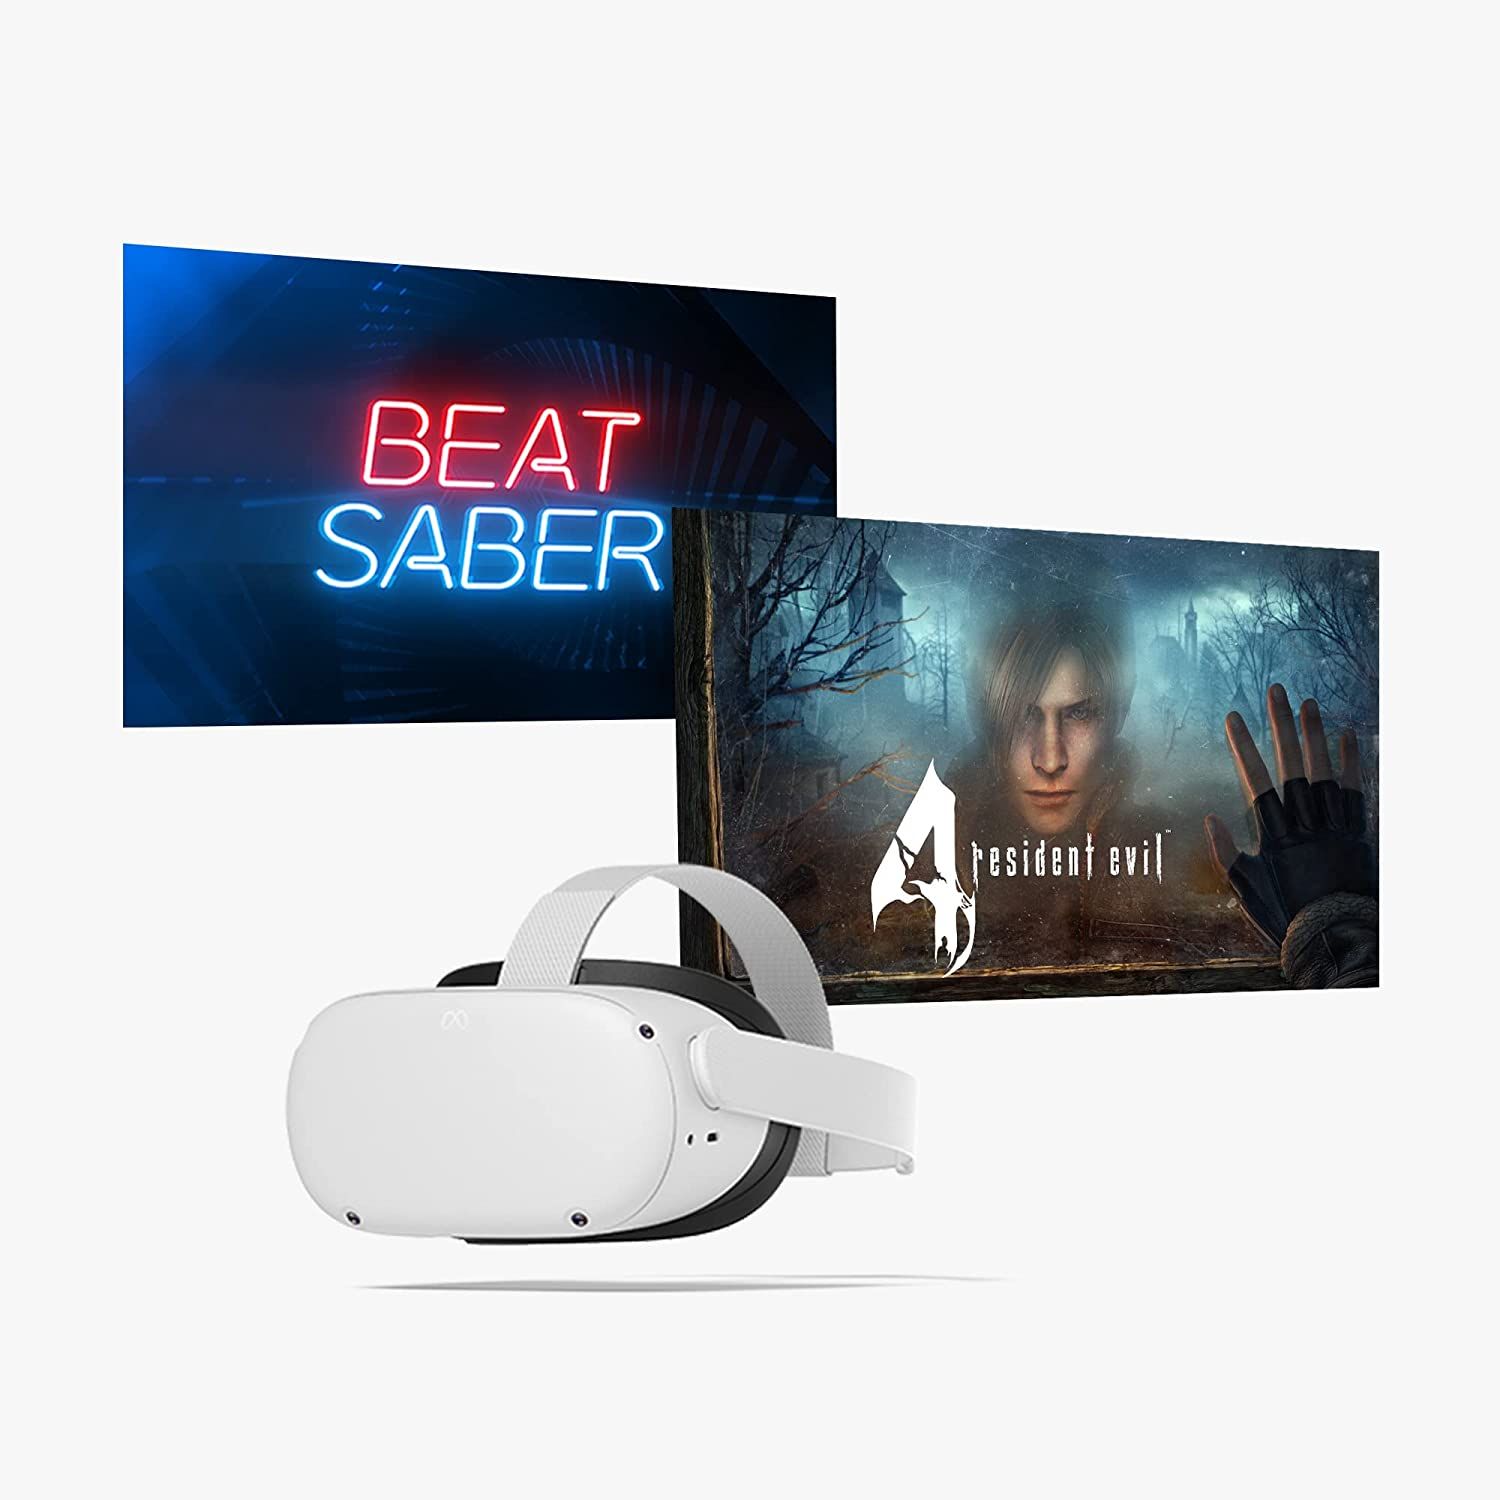 Meta Quest 2 Black Friday bundle with Resident Evil 4 and Beat Saber